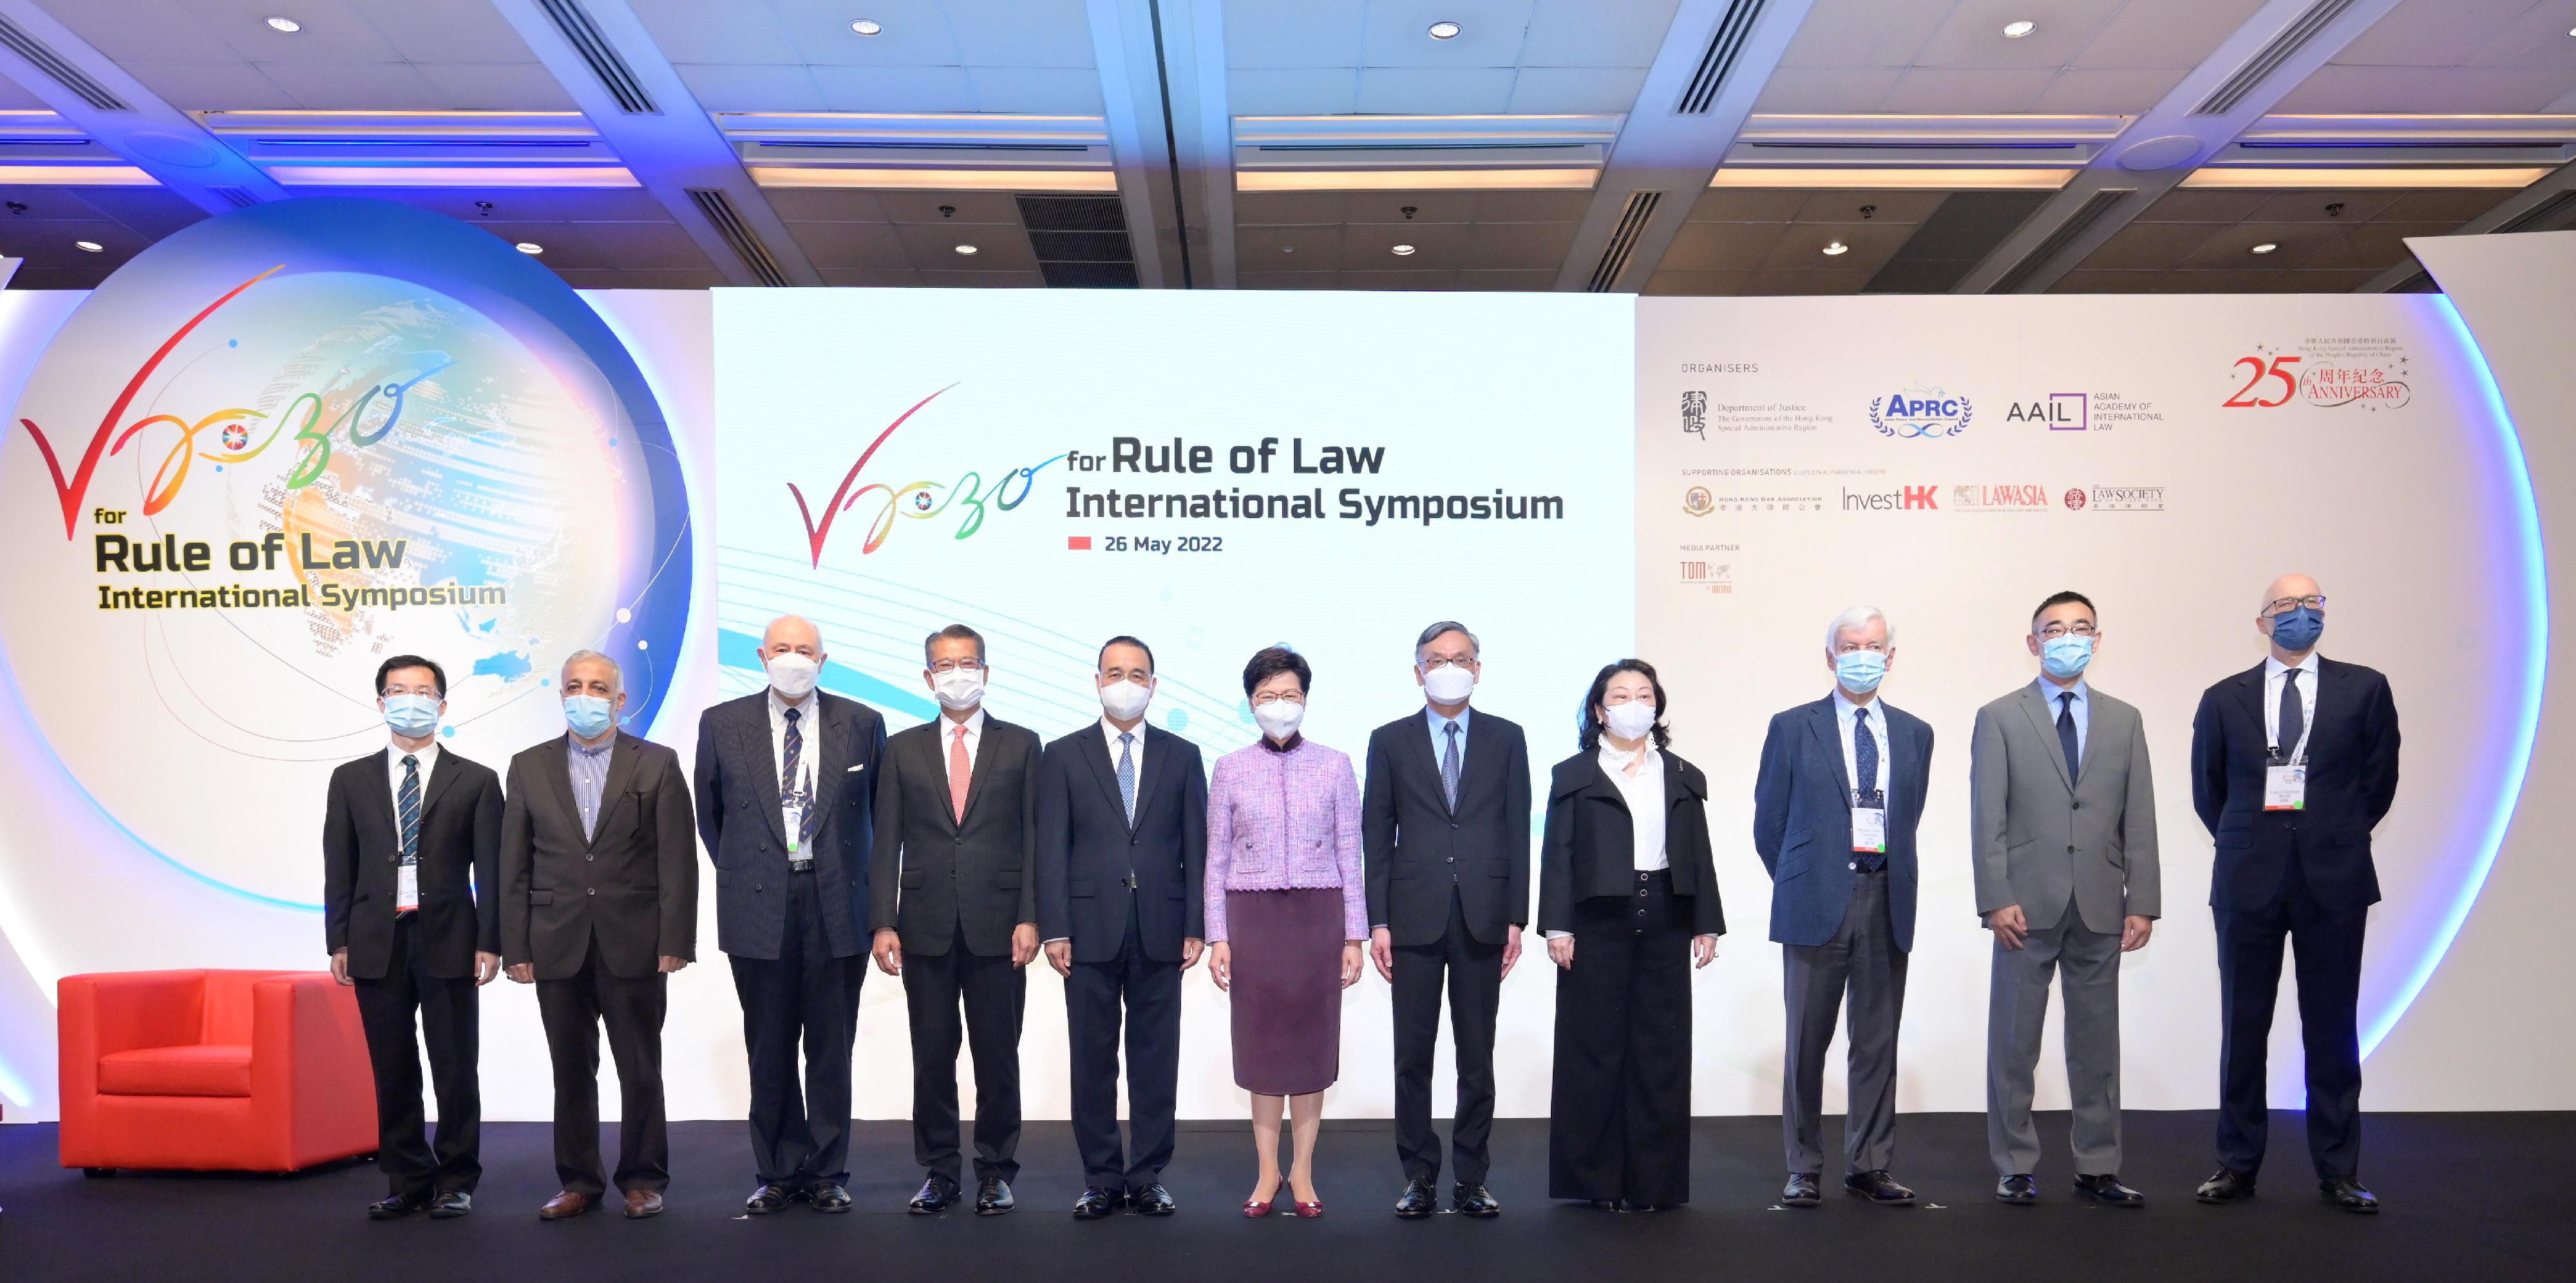 The Chief Executive, Mrs Carrie Lam, attended the Vision 2030 for Rule of Law International Symposium today (May 26). Photo shows (from third left) the Chairman of the Asian Academy of International Law, Dr Anthony Neoh; the Financial Secretary, Mr Paul Chan; the Commissioner of the Ministry of Foreign Affairs of the People's Republic of China in the Hong Kong Special Administrative Region, Mr Liu Guangyuan; Mrs Lam; the Chief Justice of the Court of Final Appeal, Mr Andrew Cheung Kui-nung; the Secretary for Justice, Ms Teresa Cheng, SC, and other speakers at the event.